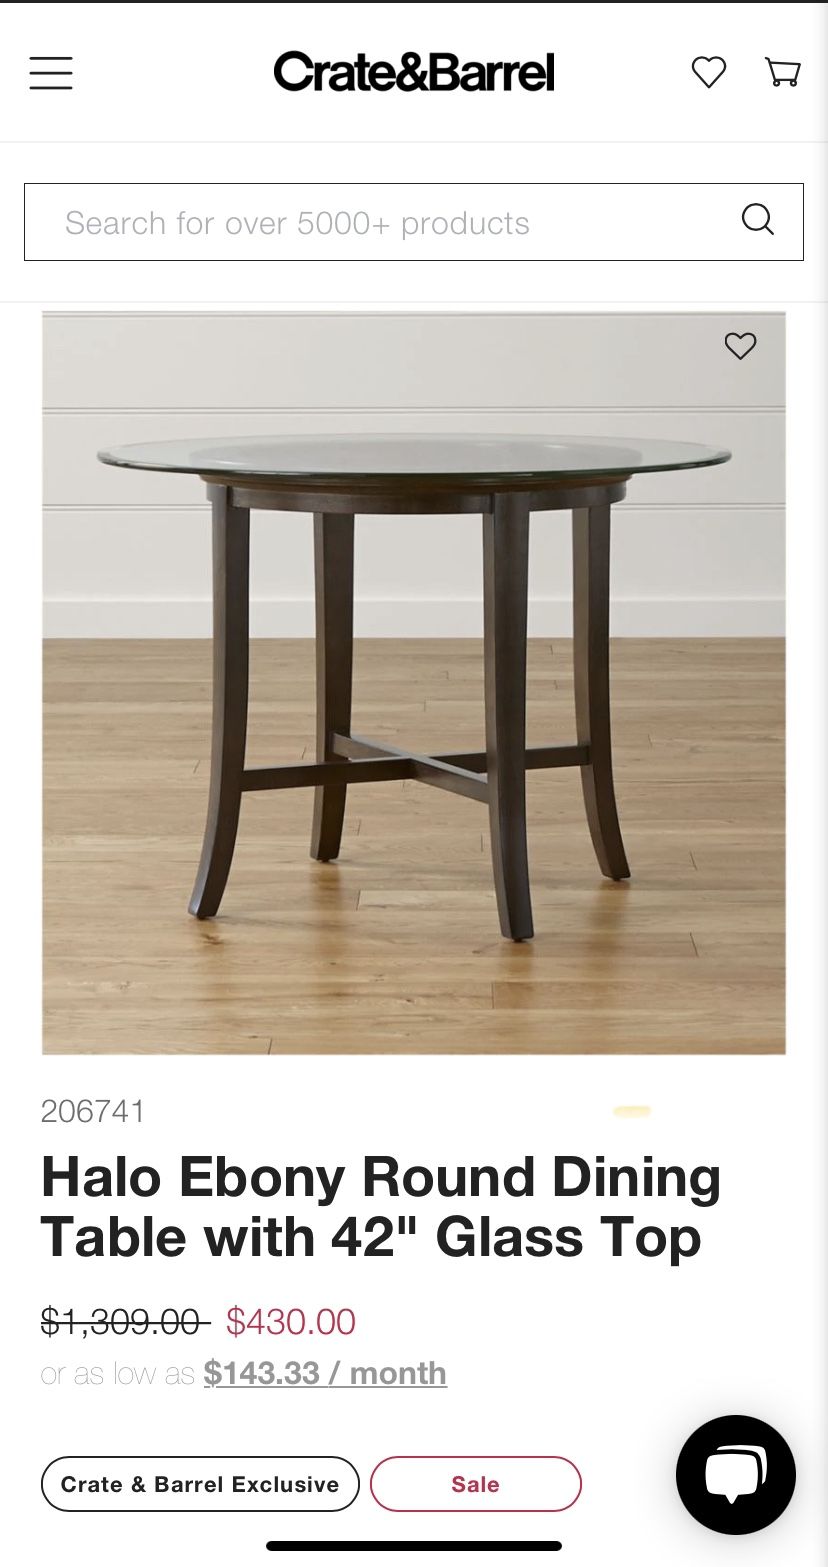 Crate&Barrel Halo Ebony Round Dining Table with 42" Glass Top